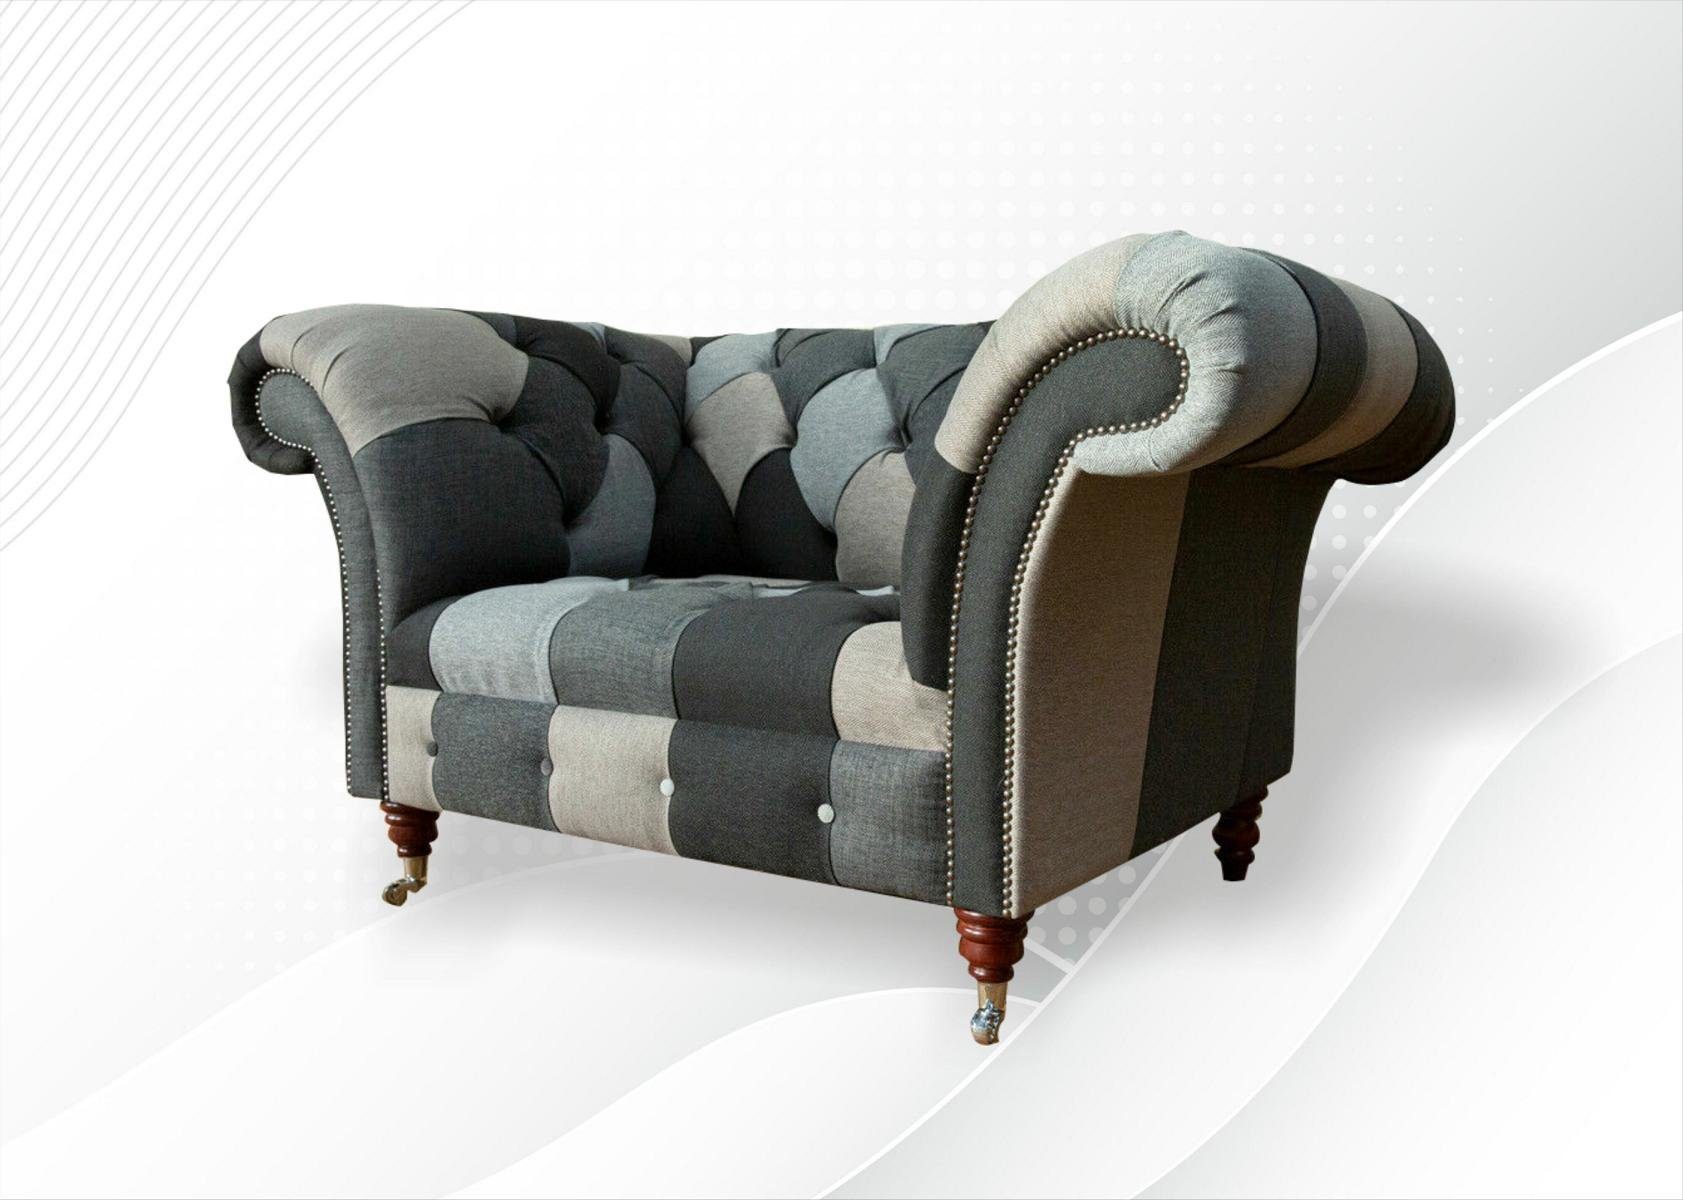 Chesterfield Couch Made Sitzer JVmoebel Designer Polster Sofa Europe Stoff Sessel Luxus 1.5 in Sofa,